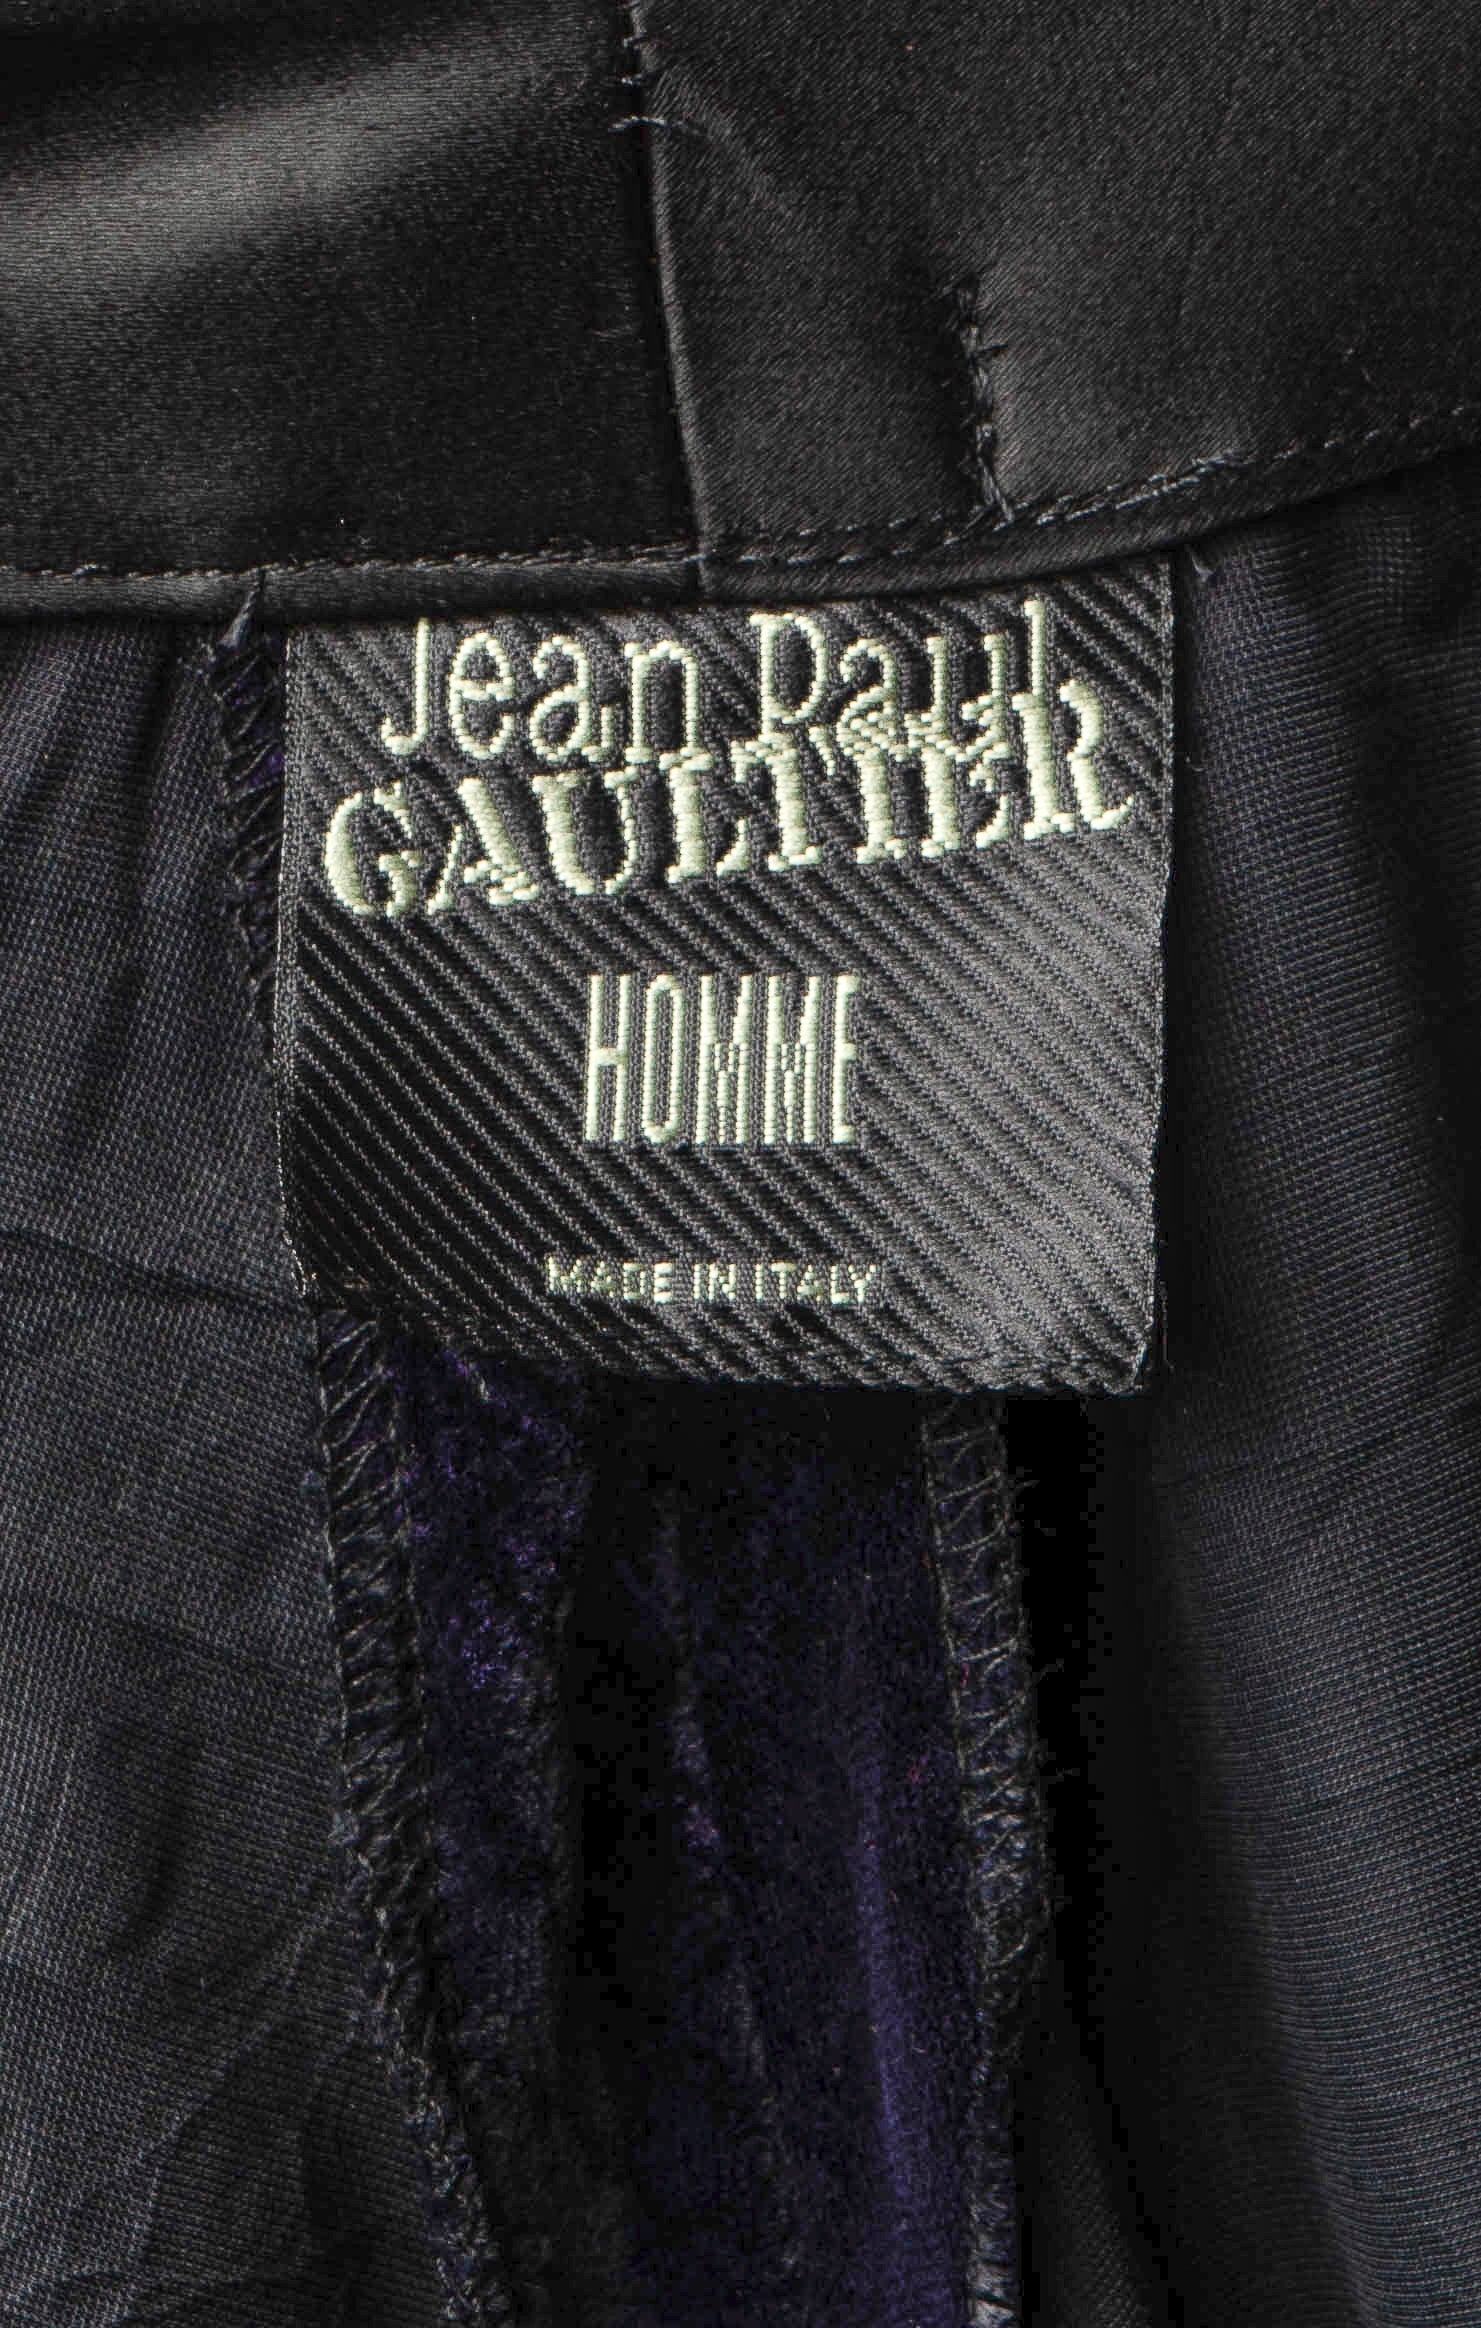 VINTAGE JEAN PAUL GAULTIER HOMME (RARE) Pants Size: Marked US 34 / Altered to Women's US 4